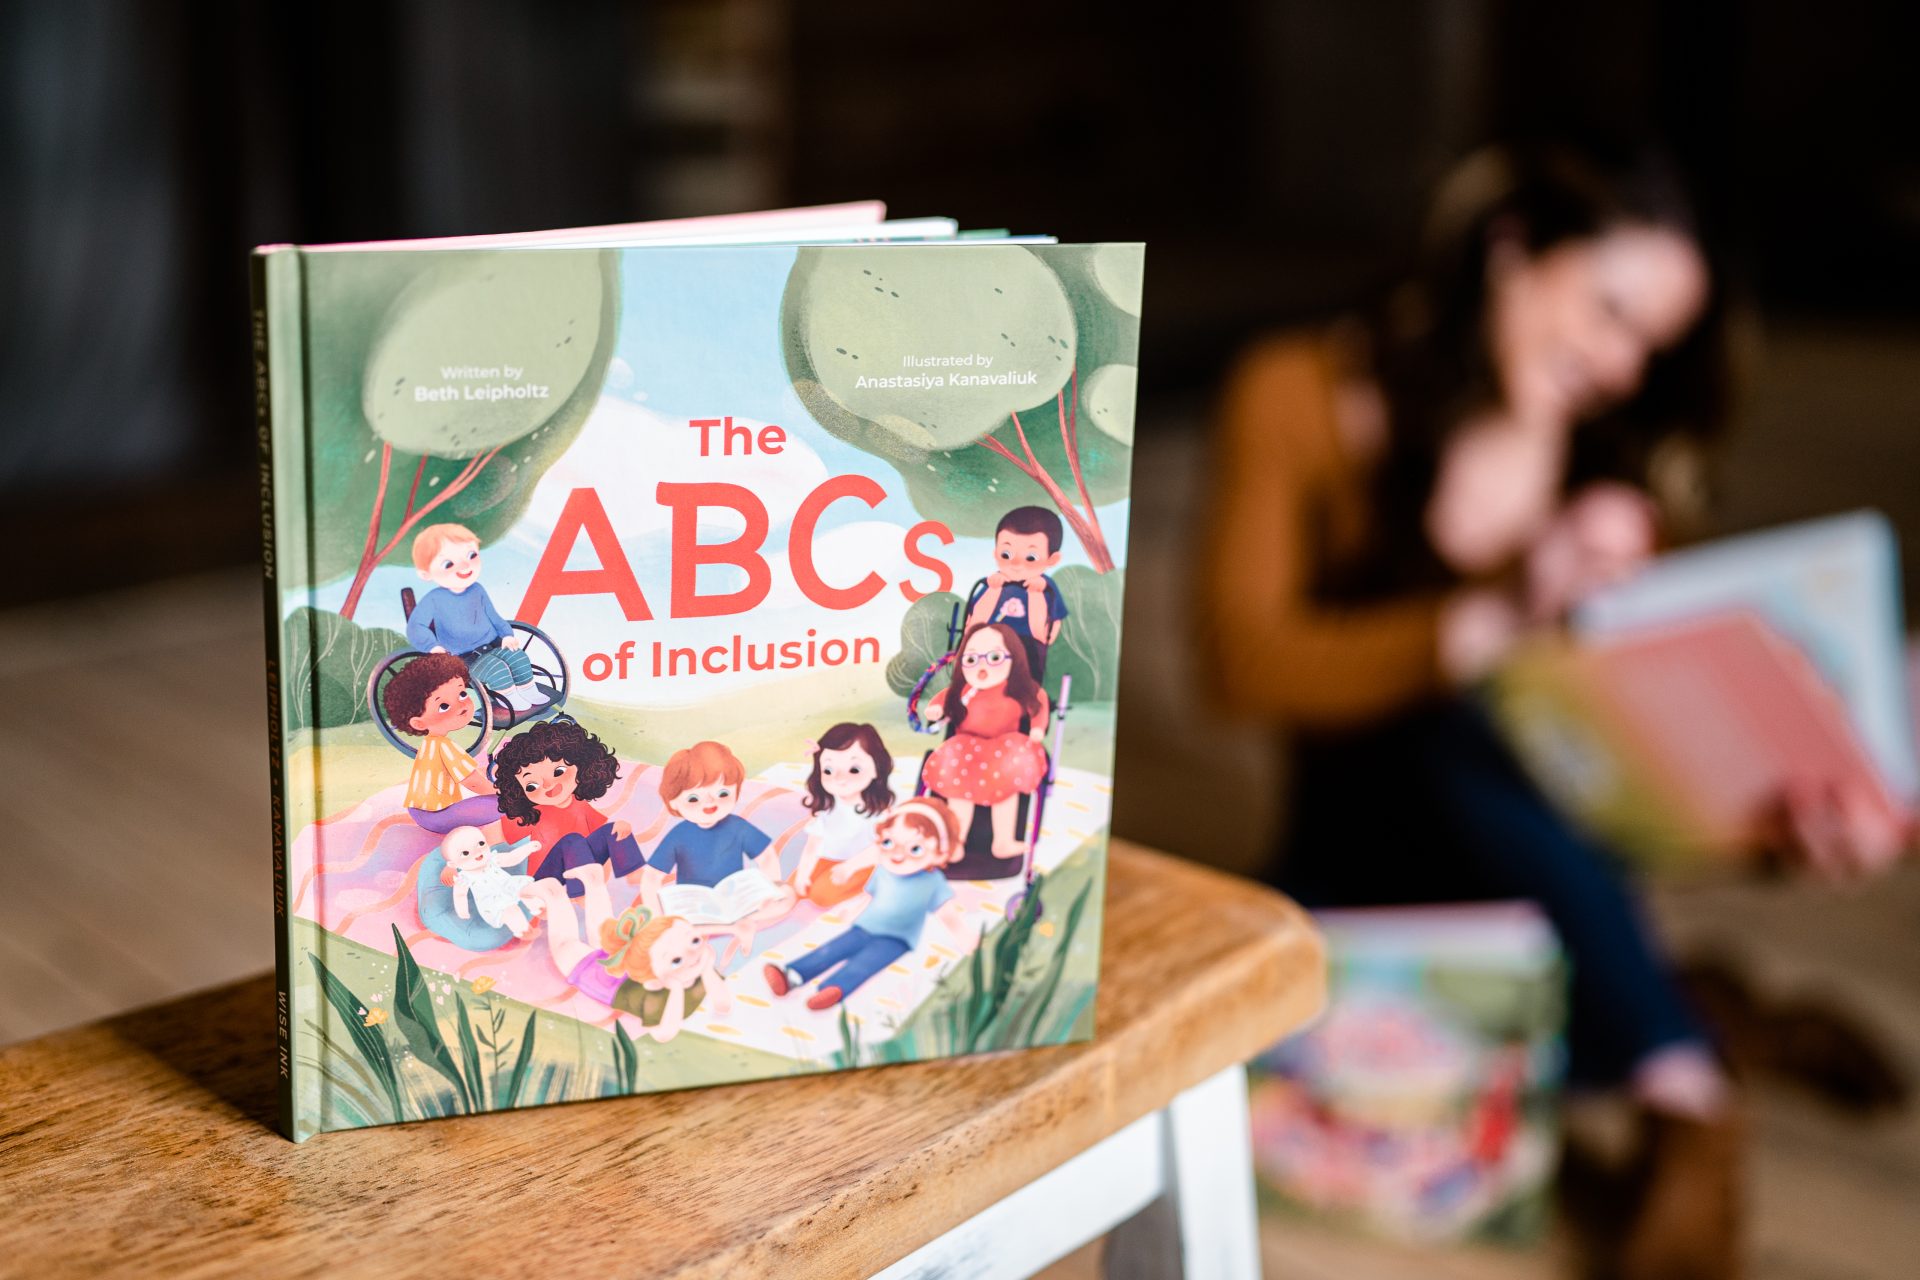 The ABCs of Inclusion is a picture book about disabilities. Meet 26 real kiddos with diagnoses like autism, hearing loss, epilepsy, and Down syndrome. It teaches young readers that it’s okay to be different—in fact, it’s what makes us special!